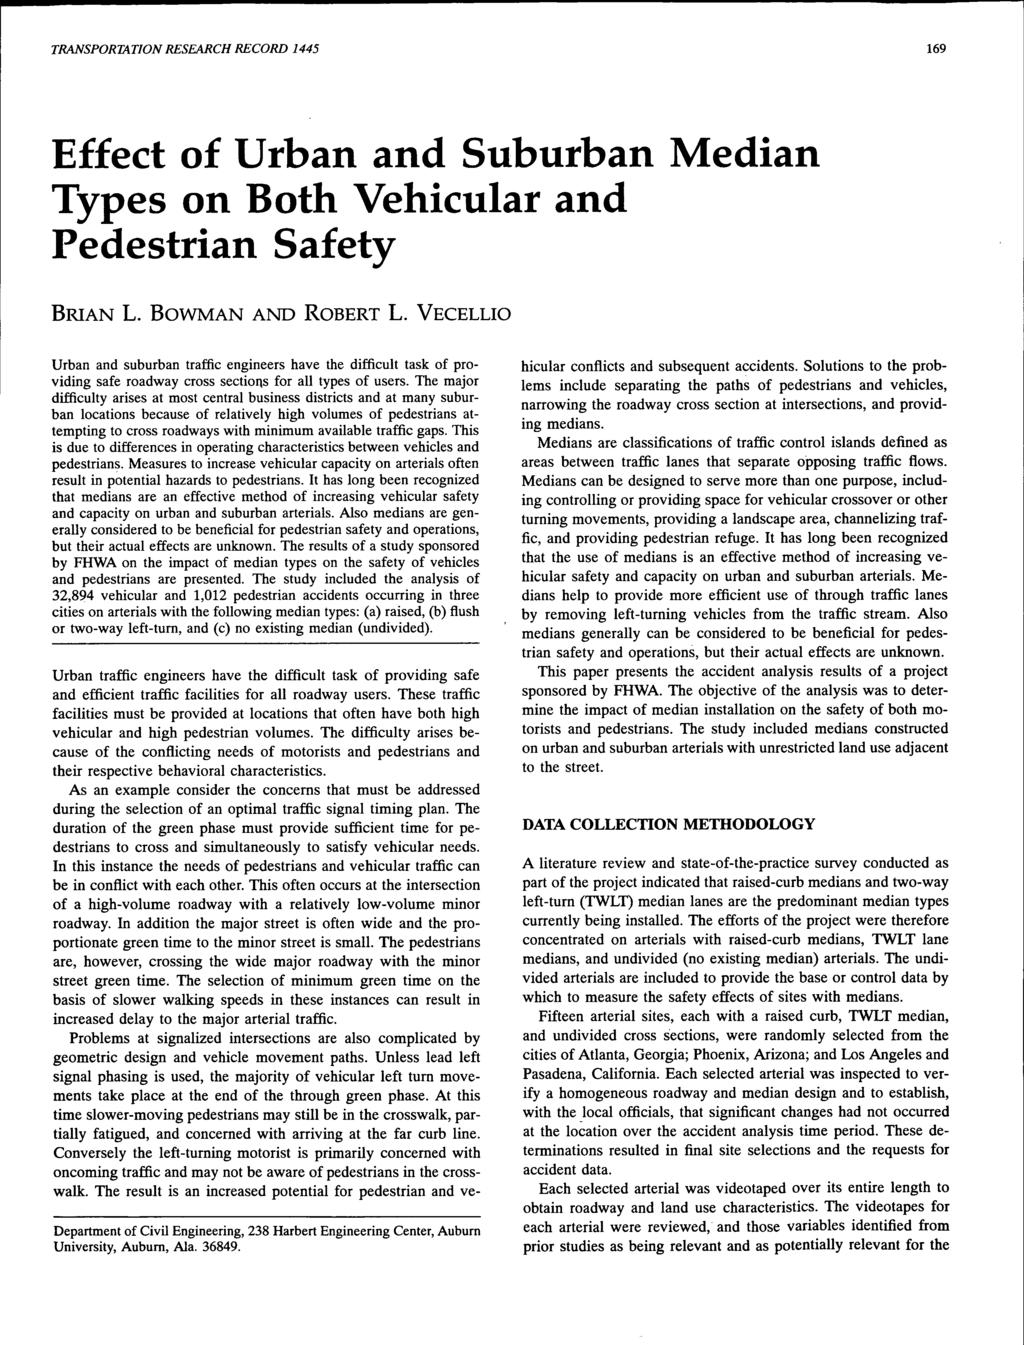 TRANSPORTATION RESEARCH RECORD 445 69 Effect of Urban and Suburban Median Types on Both Vehicular and Pedestrian Safety BRIAN L. BOWMAN AND ROBERT L.